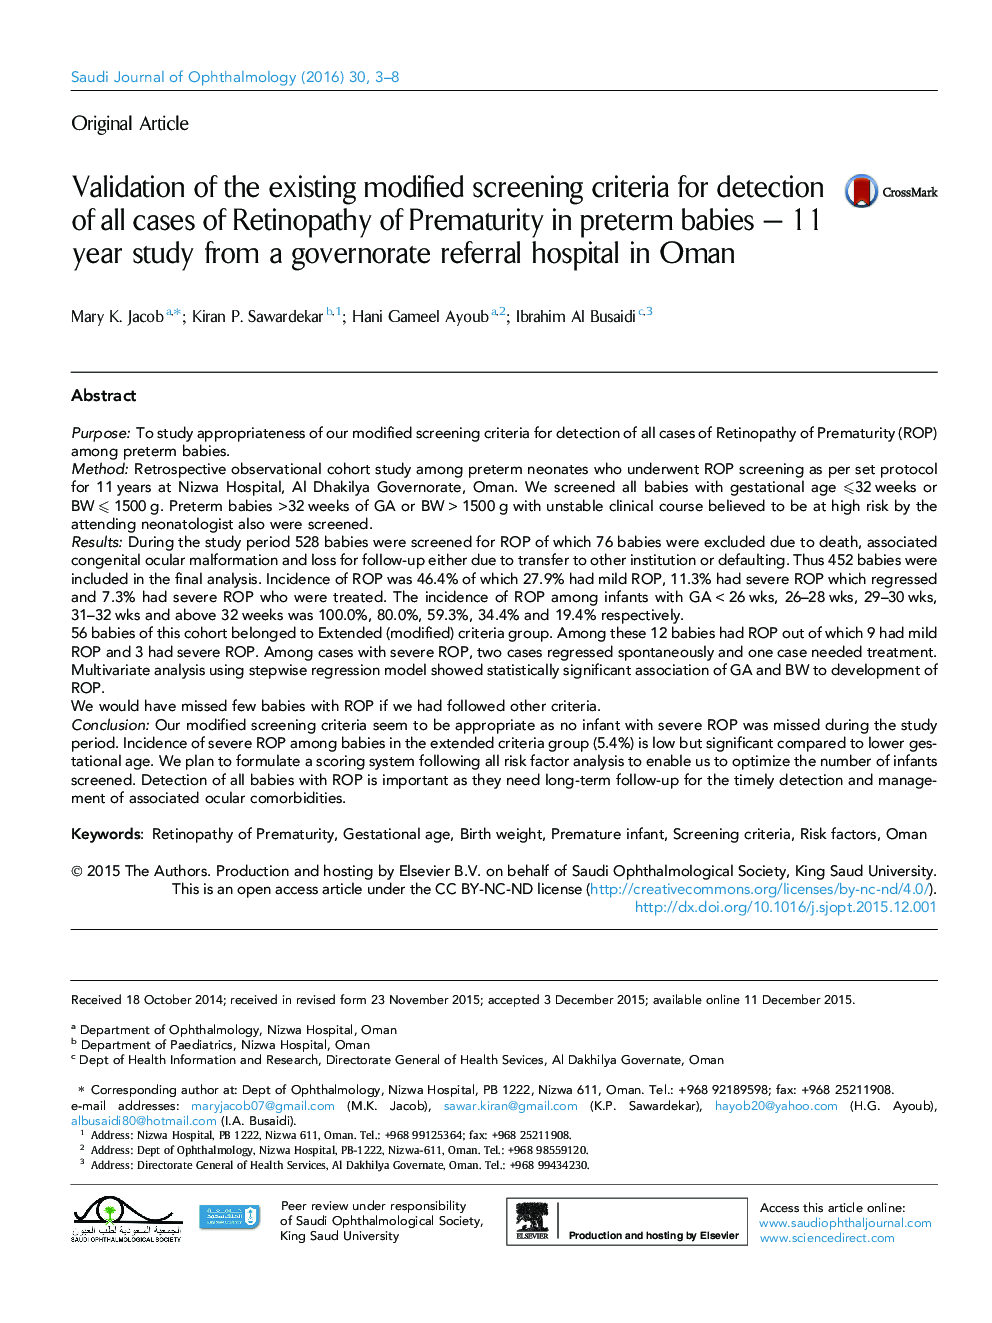 Validation of the existing modified screening criteria for detection of all cases of Retinopathy of Prematurity in preterm babies – 11 year study from a governorate referral hospital in Oman 